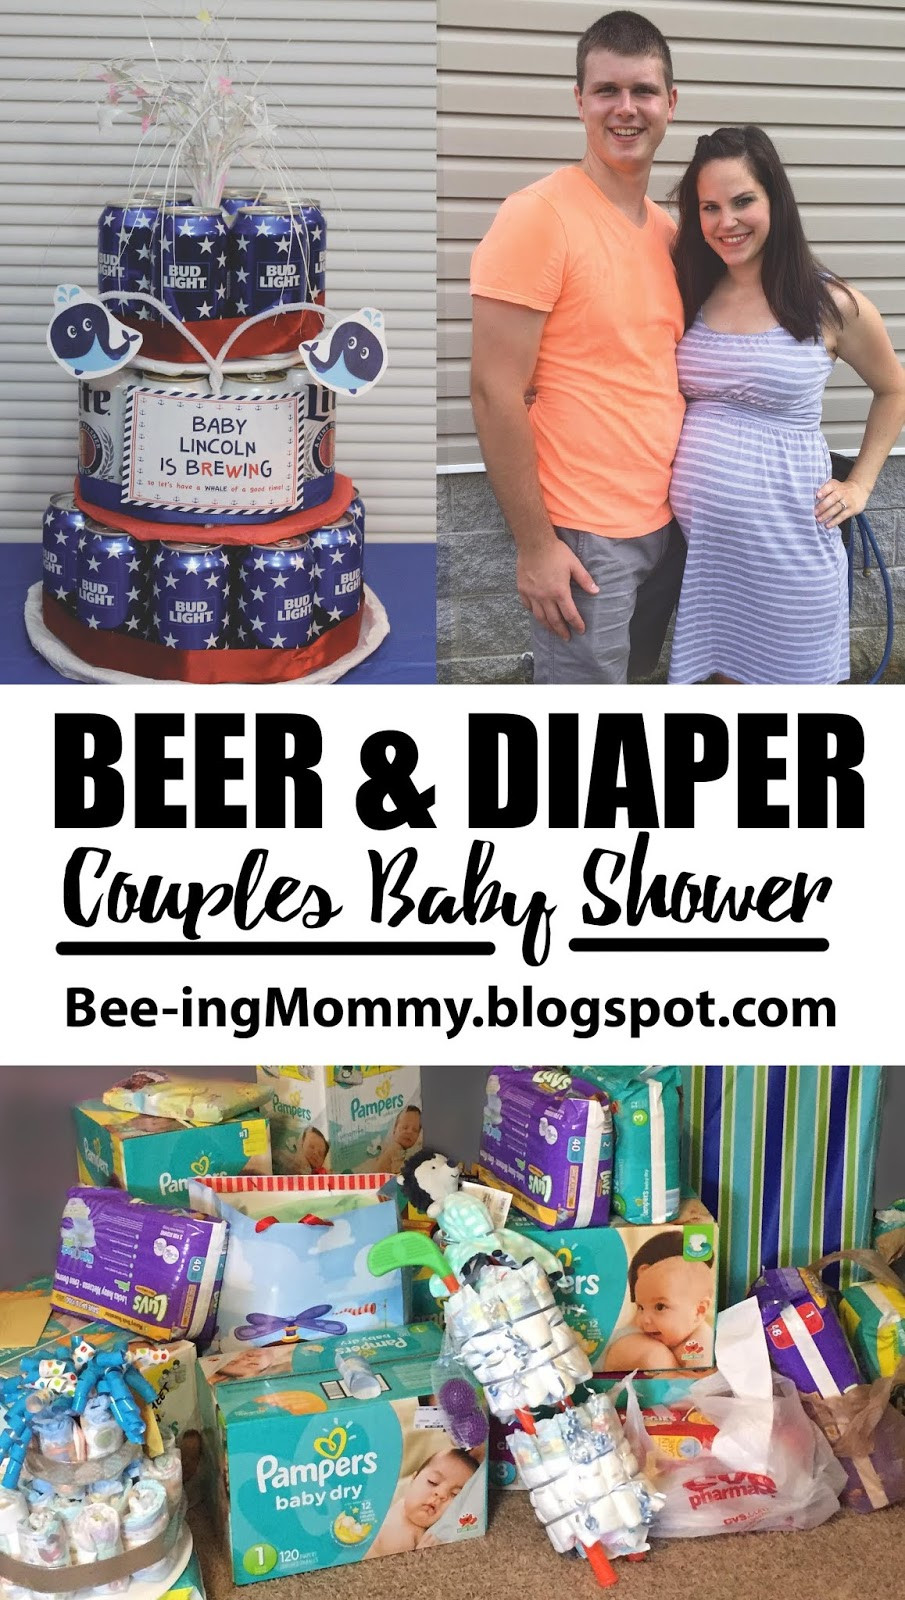 Diaper Party Ideas For Second Baby
 Couples Baby Shower Diaper & Beer Party